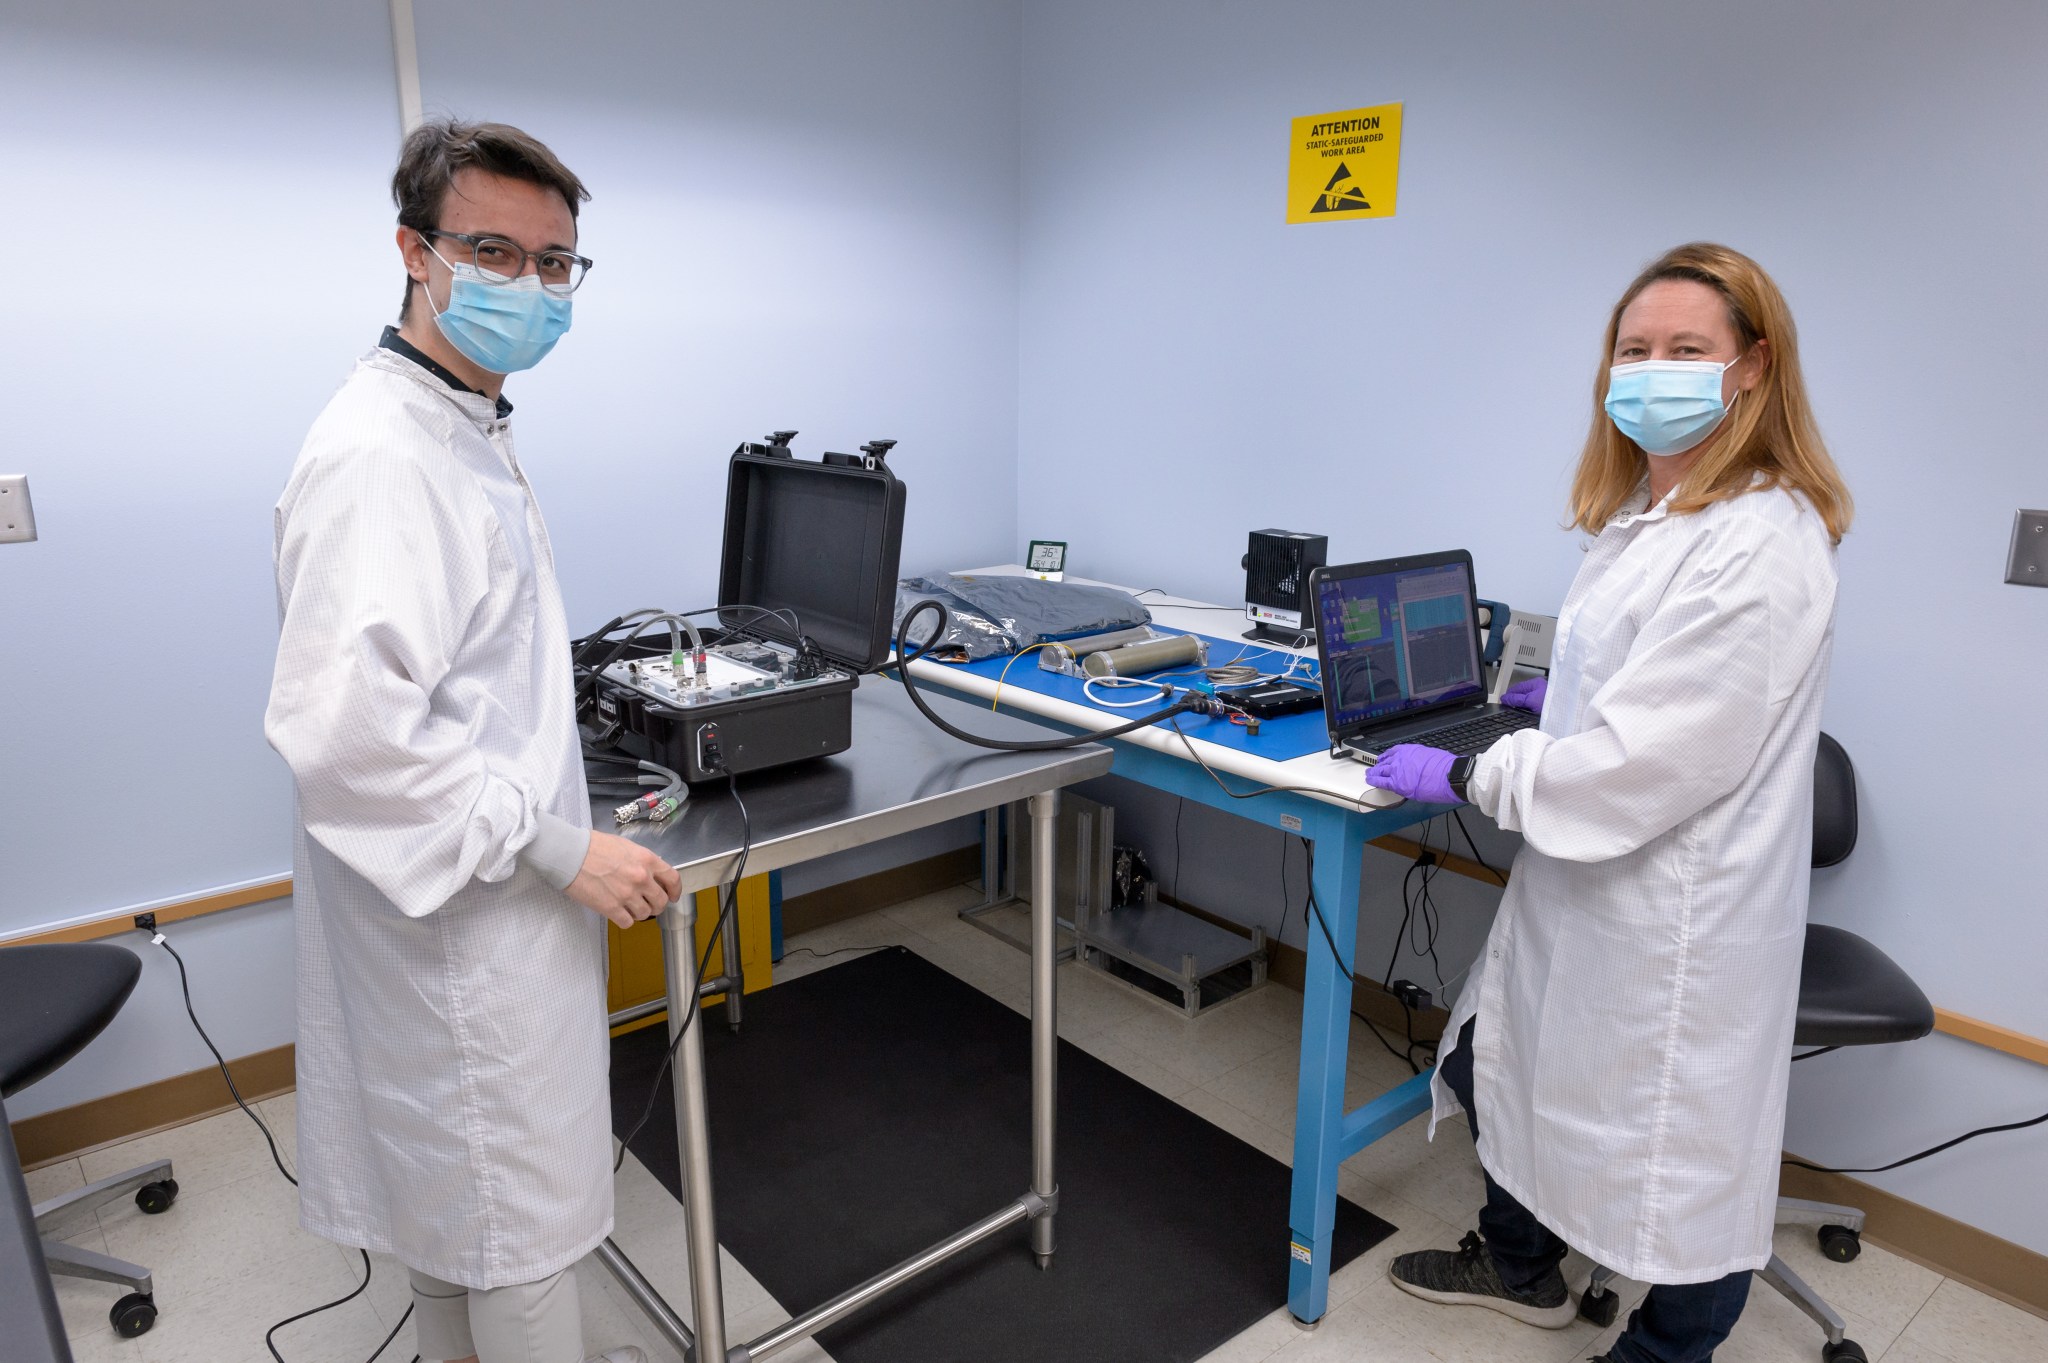 Two people in lab coats and masks standing over two connected tables, each with their own device connected by wiring.